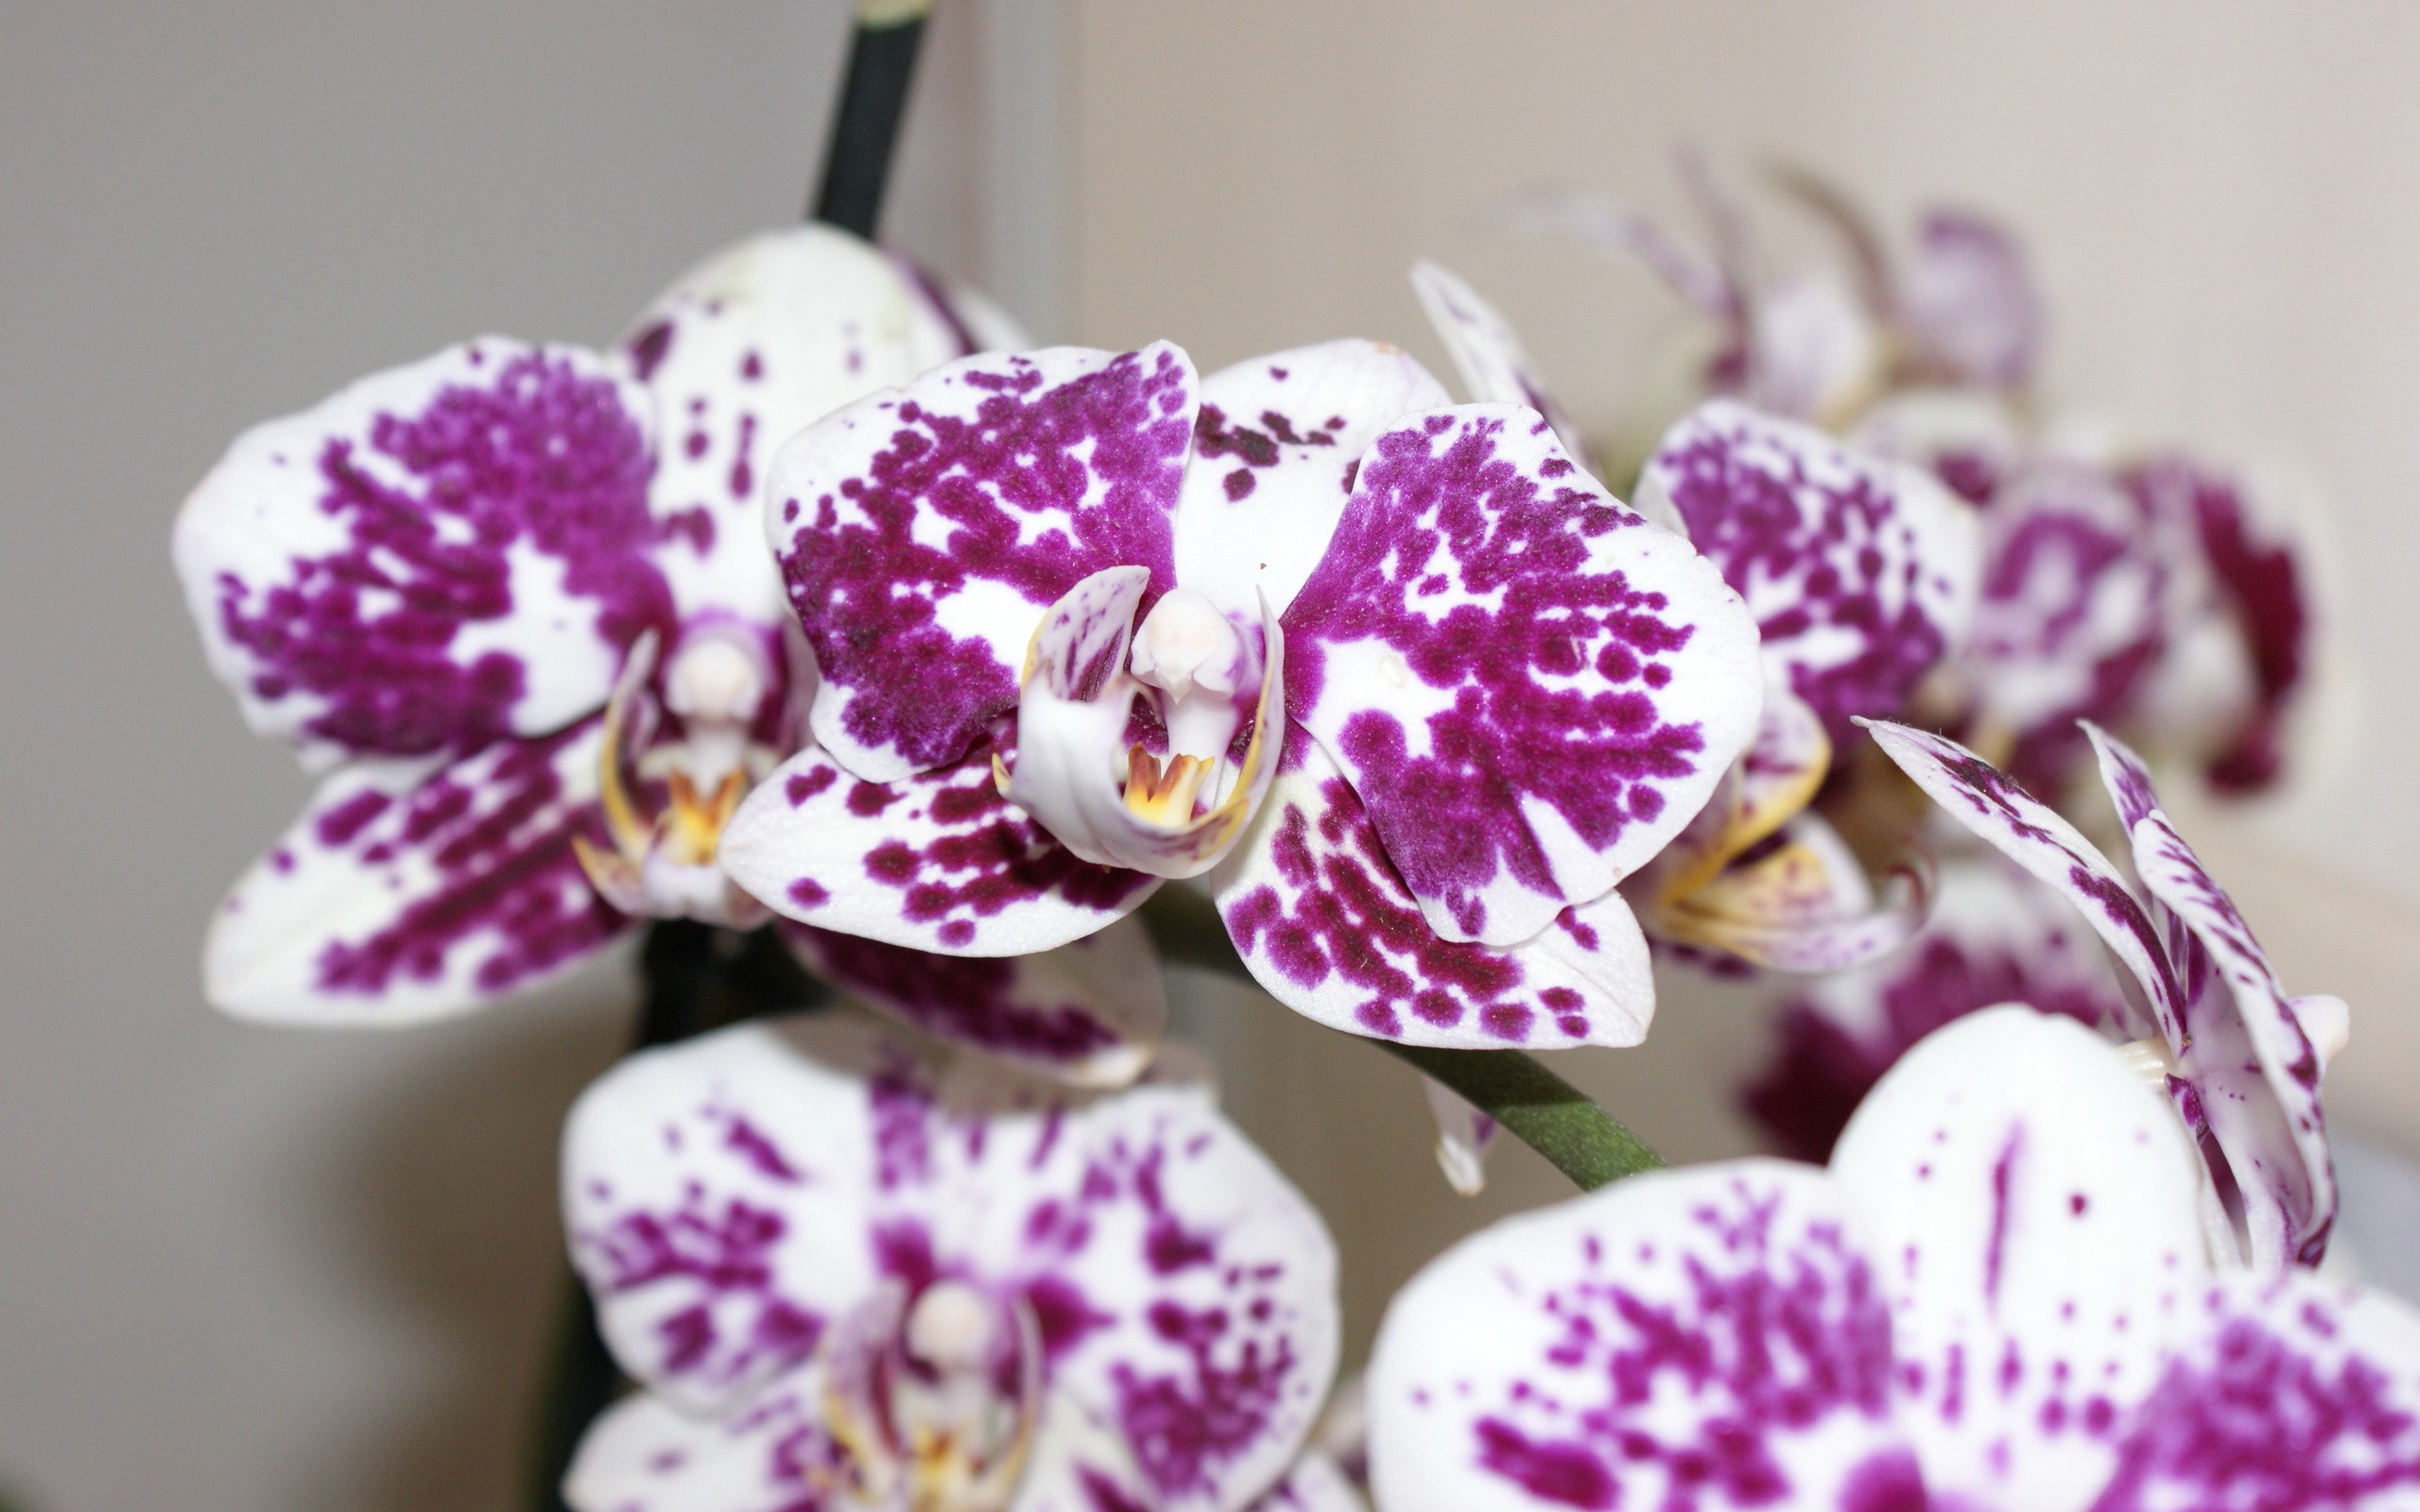 Earth Orchid HD Wallpaper | Background Image